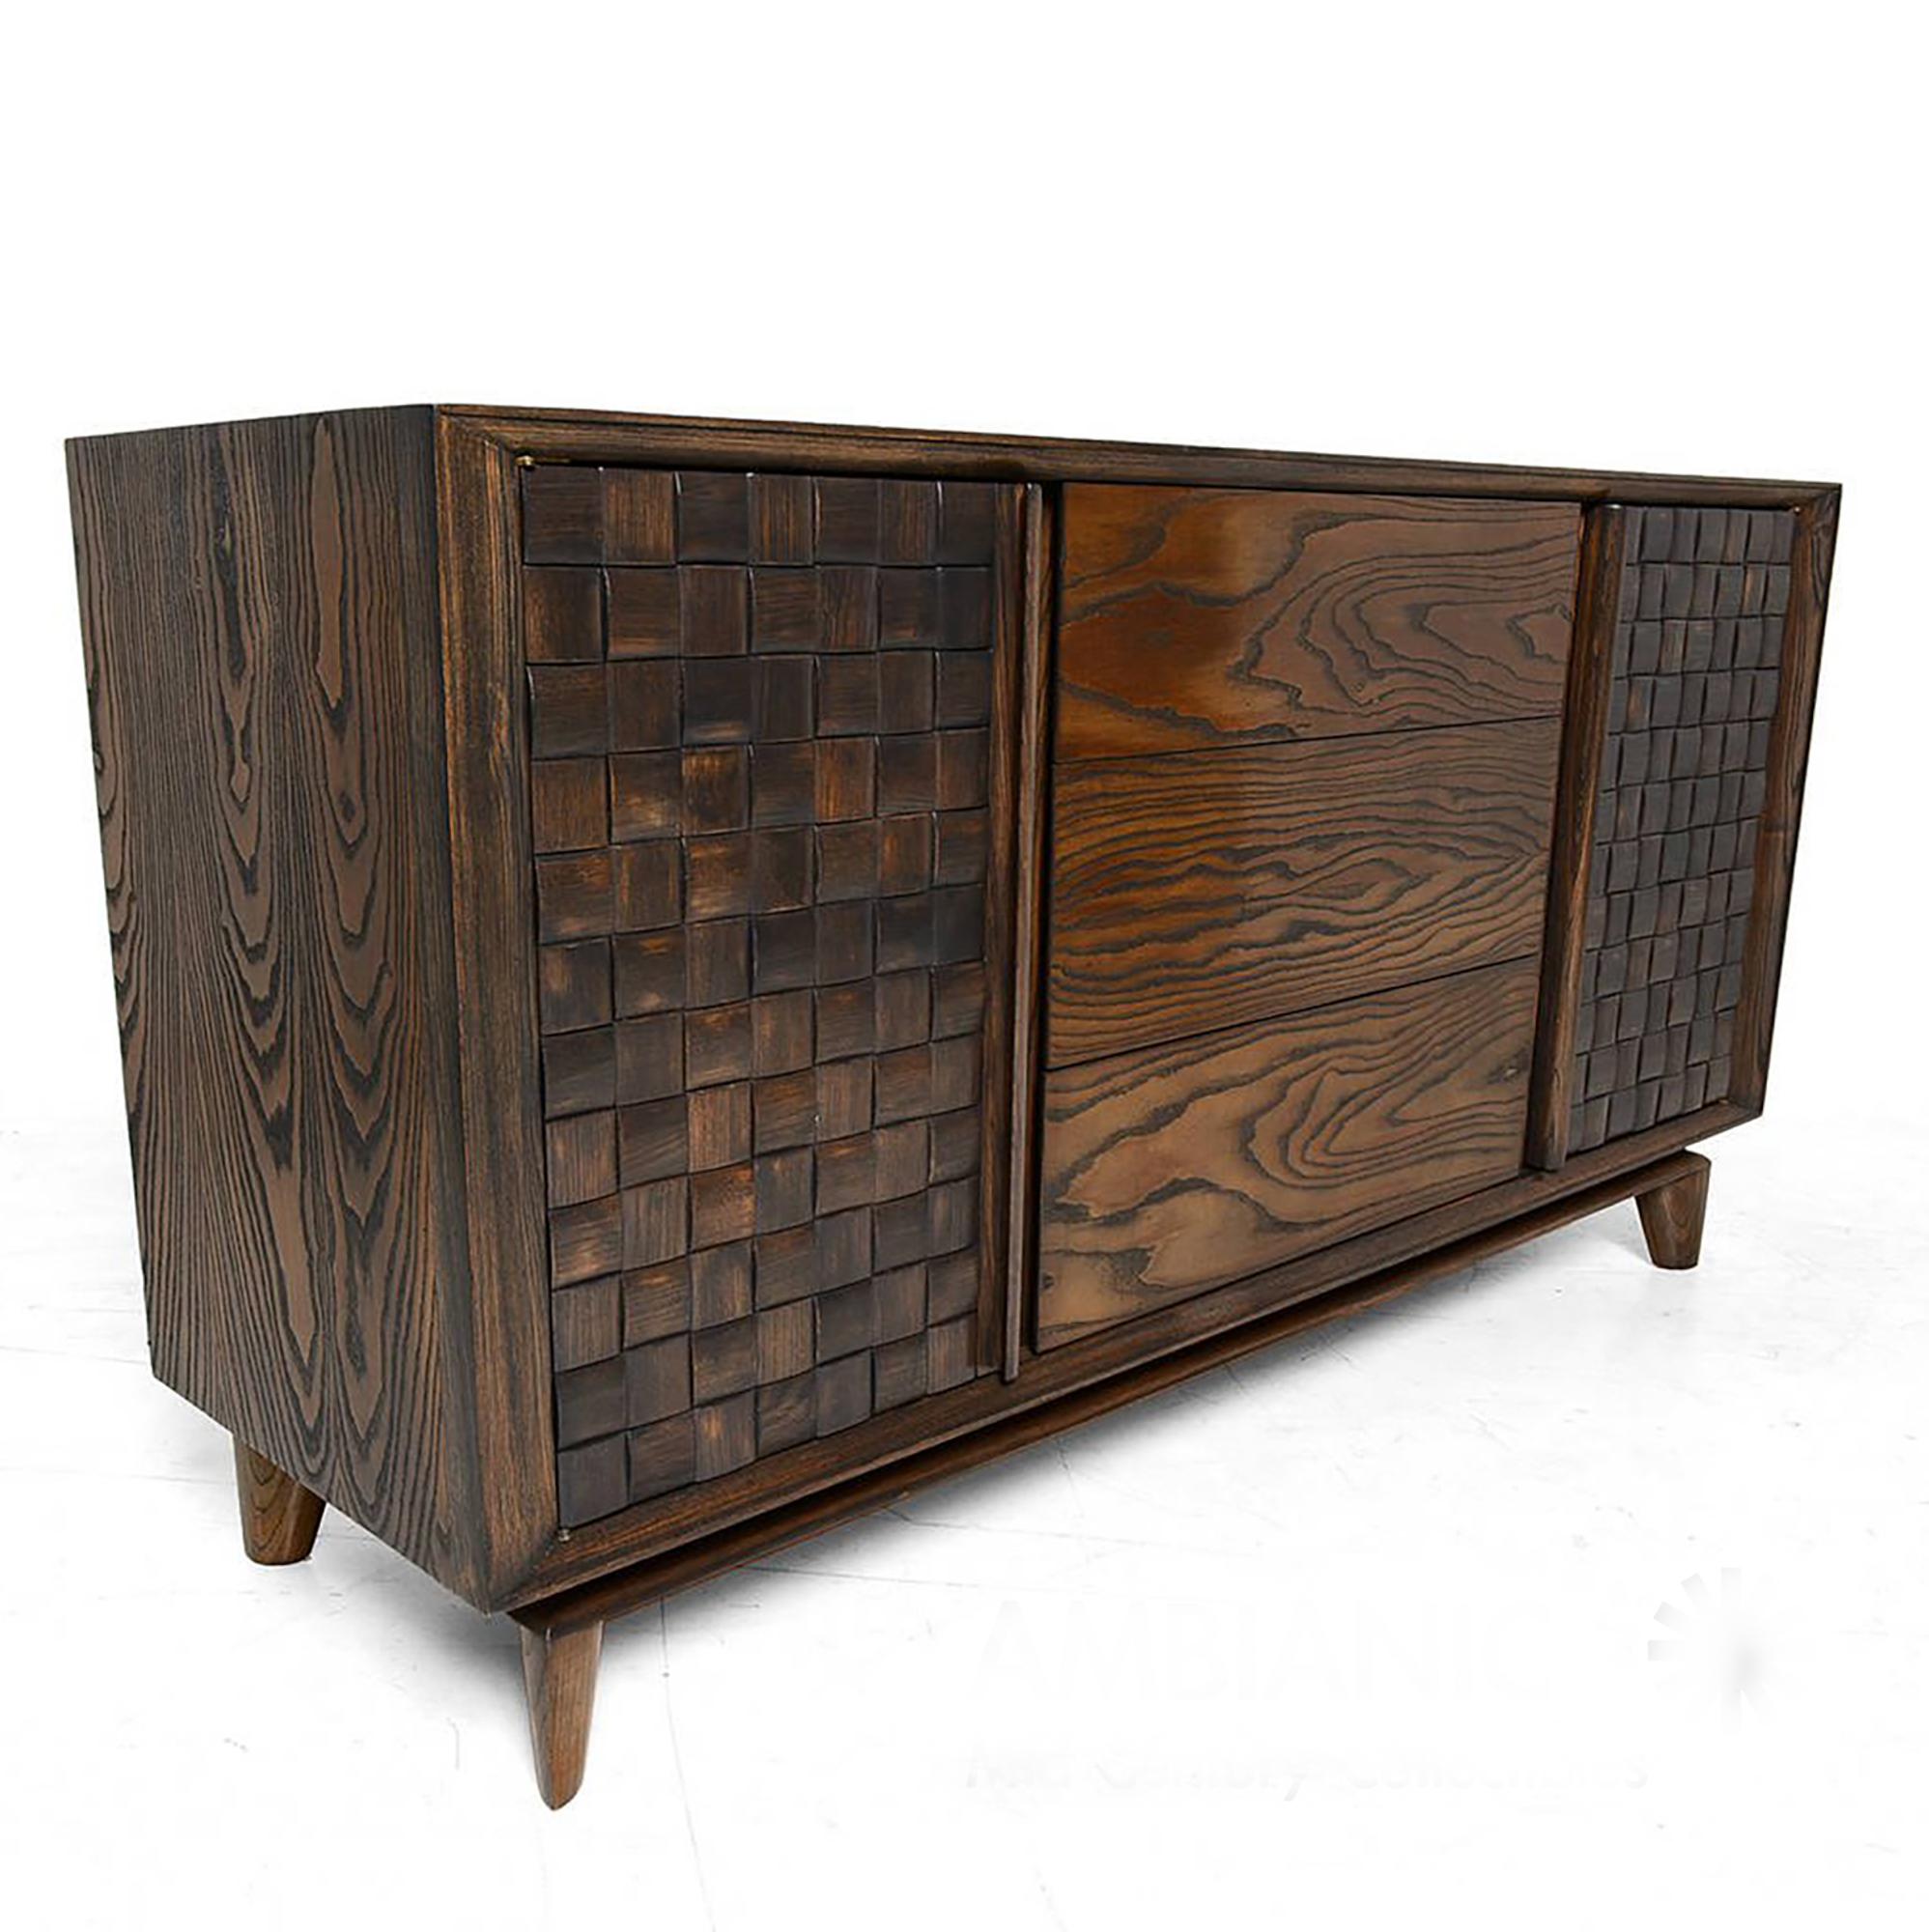 Fabulous fifties classic oak credenza buffet with basket weave checkered design by architect and interior designer Paul Laszlo for Brown Saltman USA 1955. 
Credenza has two open storage areas with shelves- three pull-out drawers. 
All drawers are